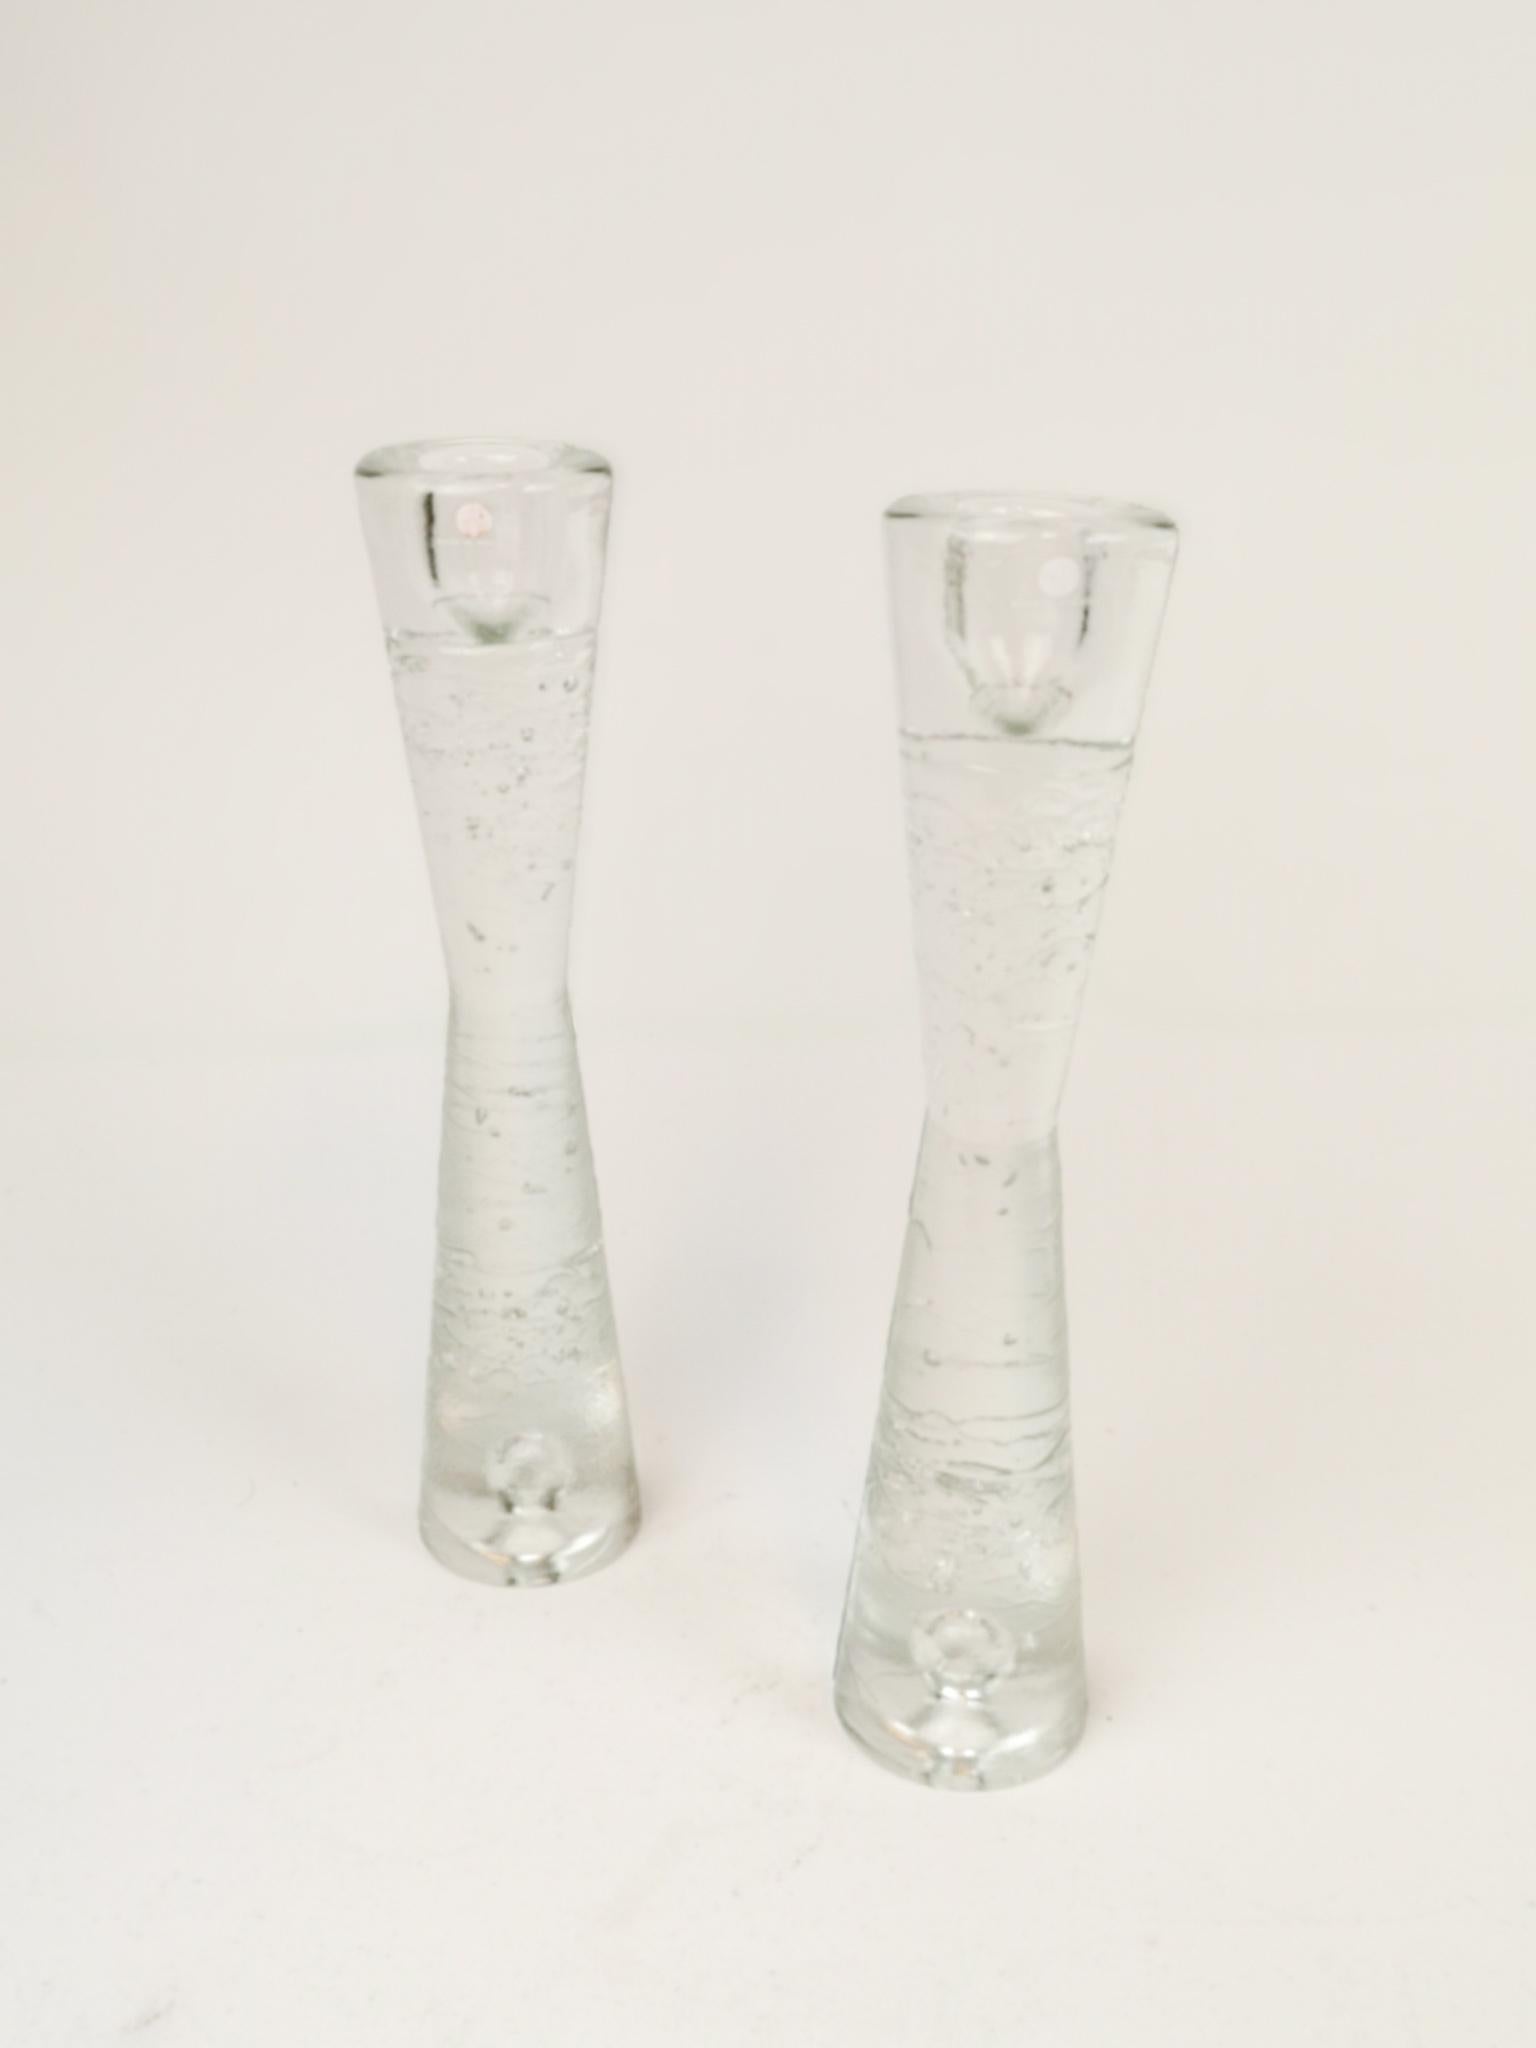 Group of 2 Iittala Arkipelago candlesticks in time glass high forms.
Architectural cast clear glass blocks.
With bubbles. They are created to appear as if they were is blocks. They are designed by Timo Sarpaneva in the 1970s for Iittala